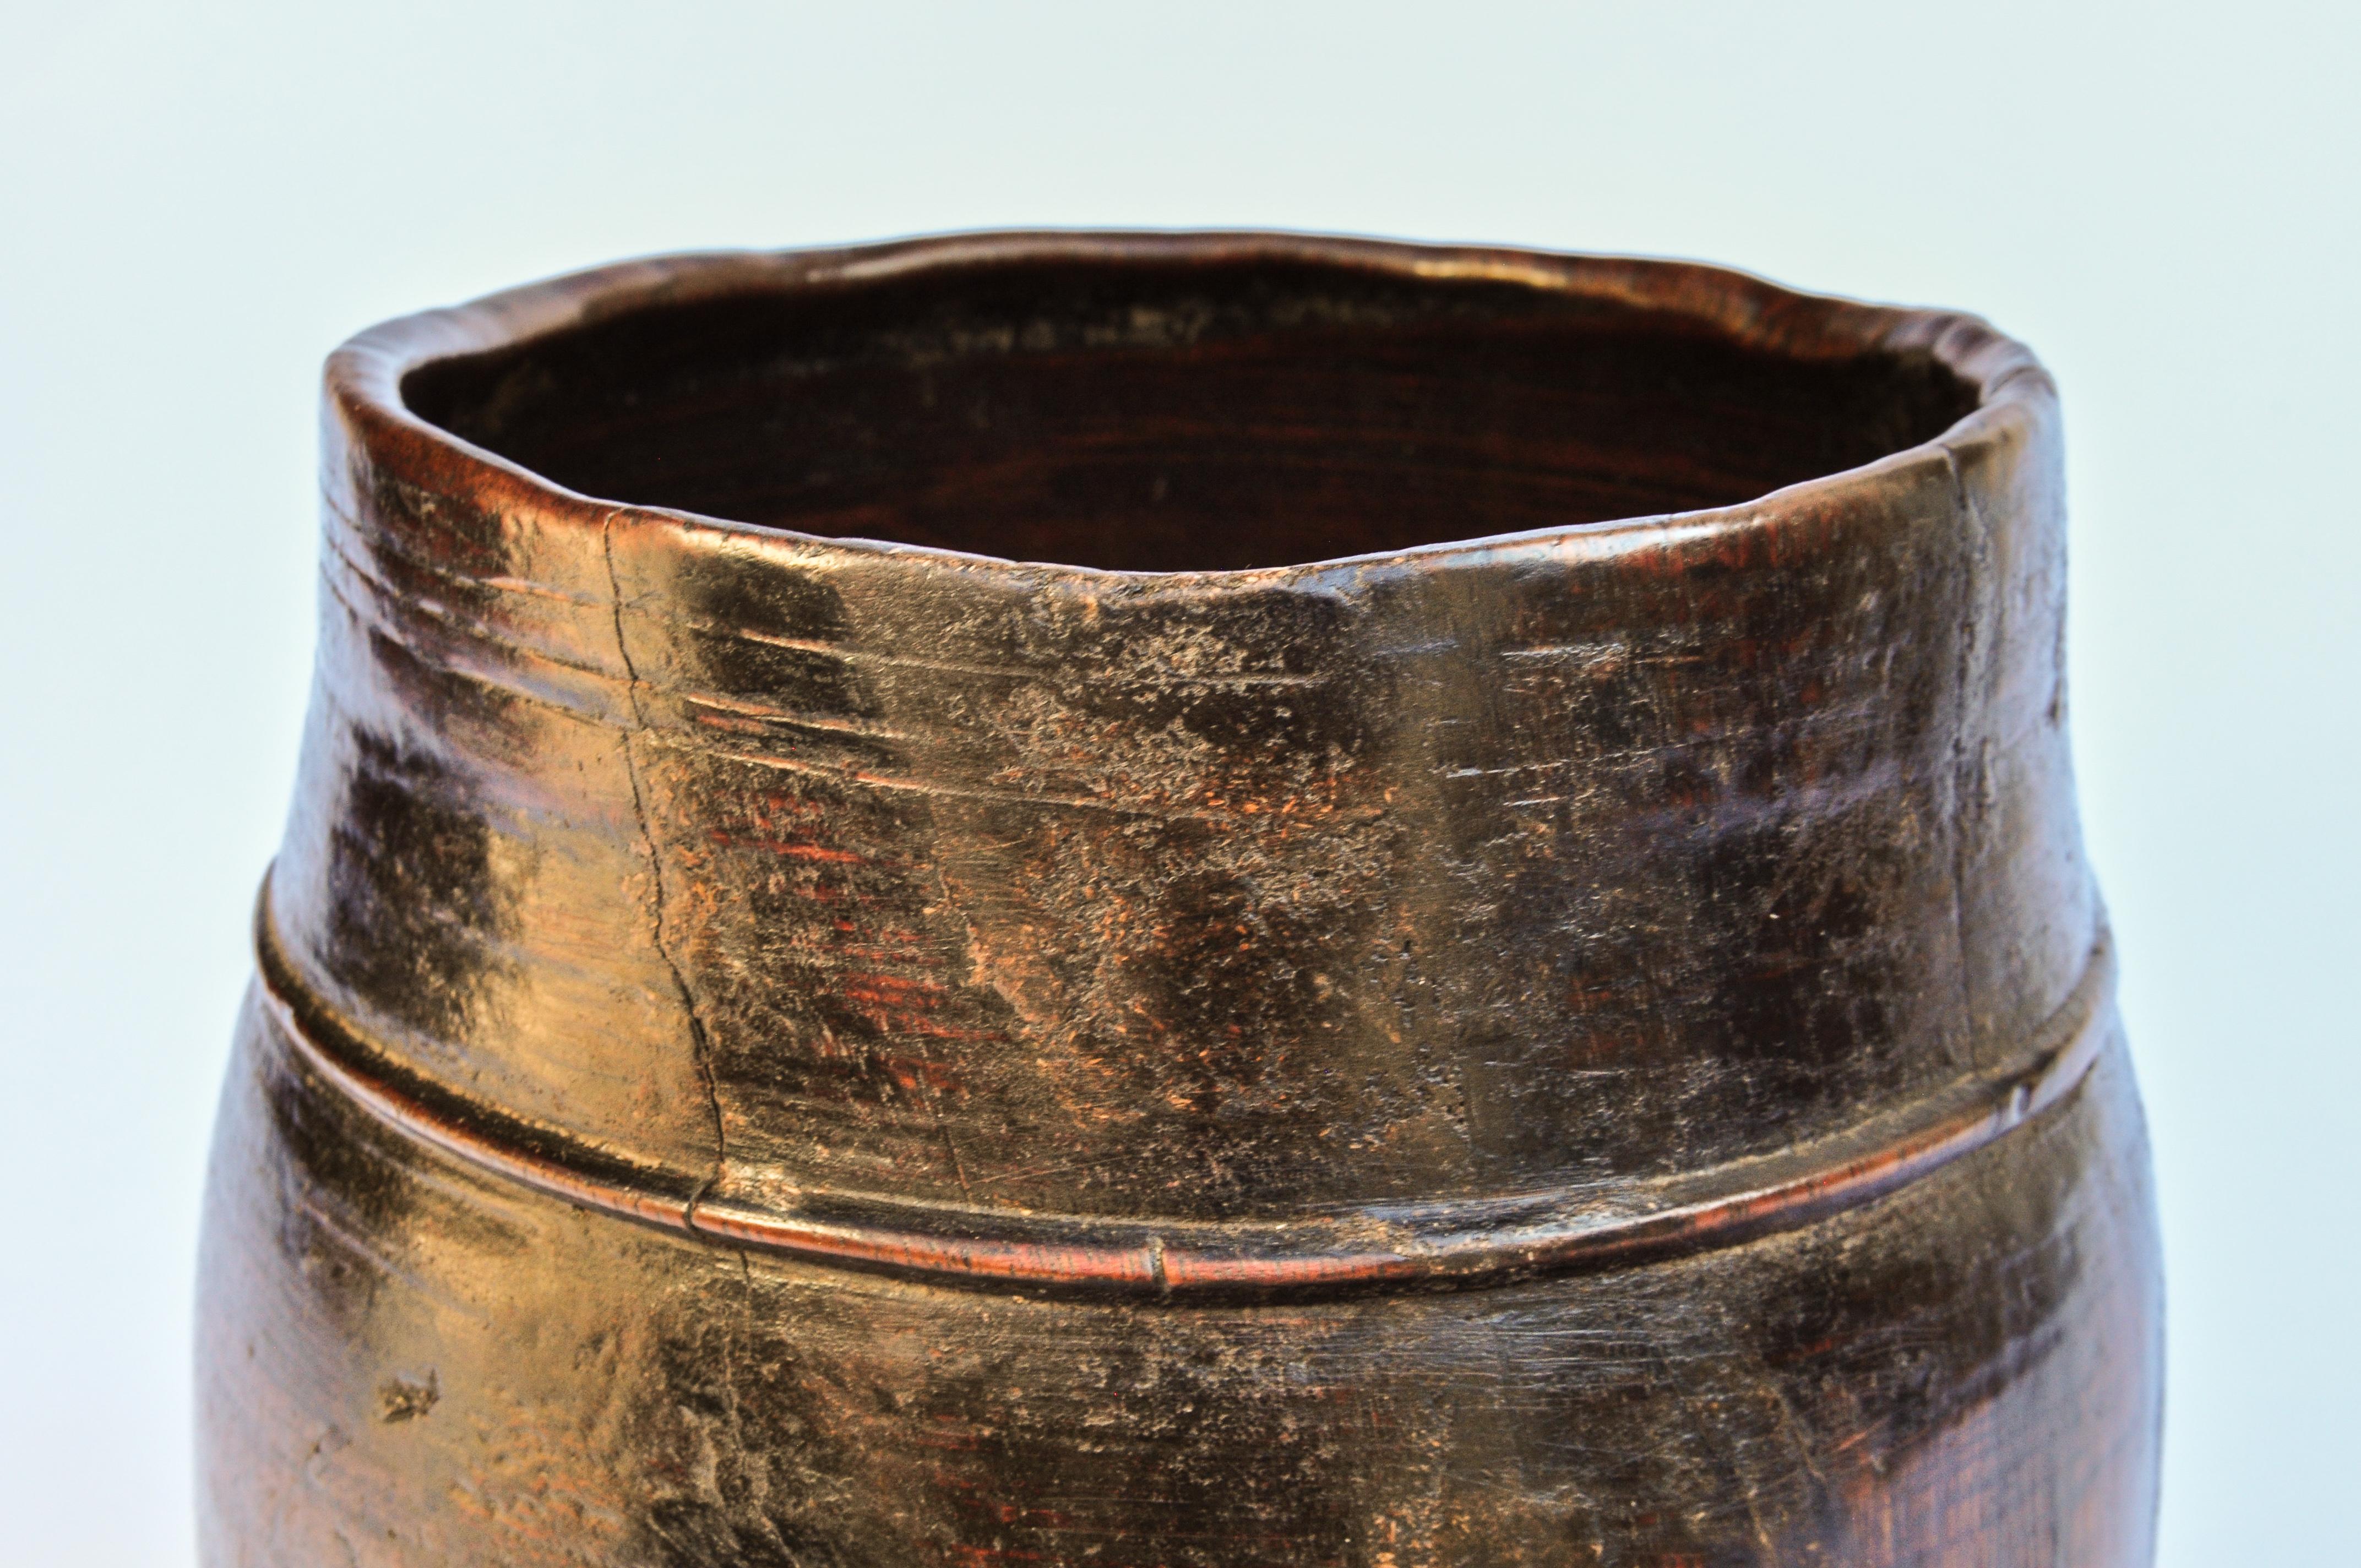 Hardwood Vintage Wooden Grain Measure Pot from the Mountains of Nepal, Mid-20th Century